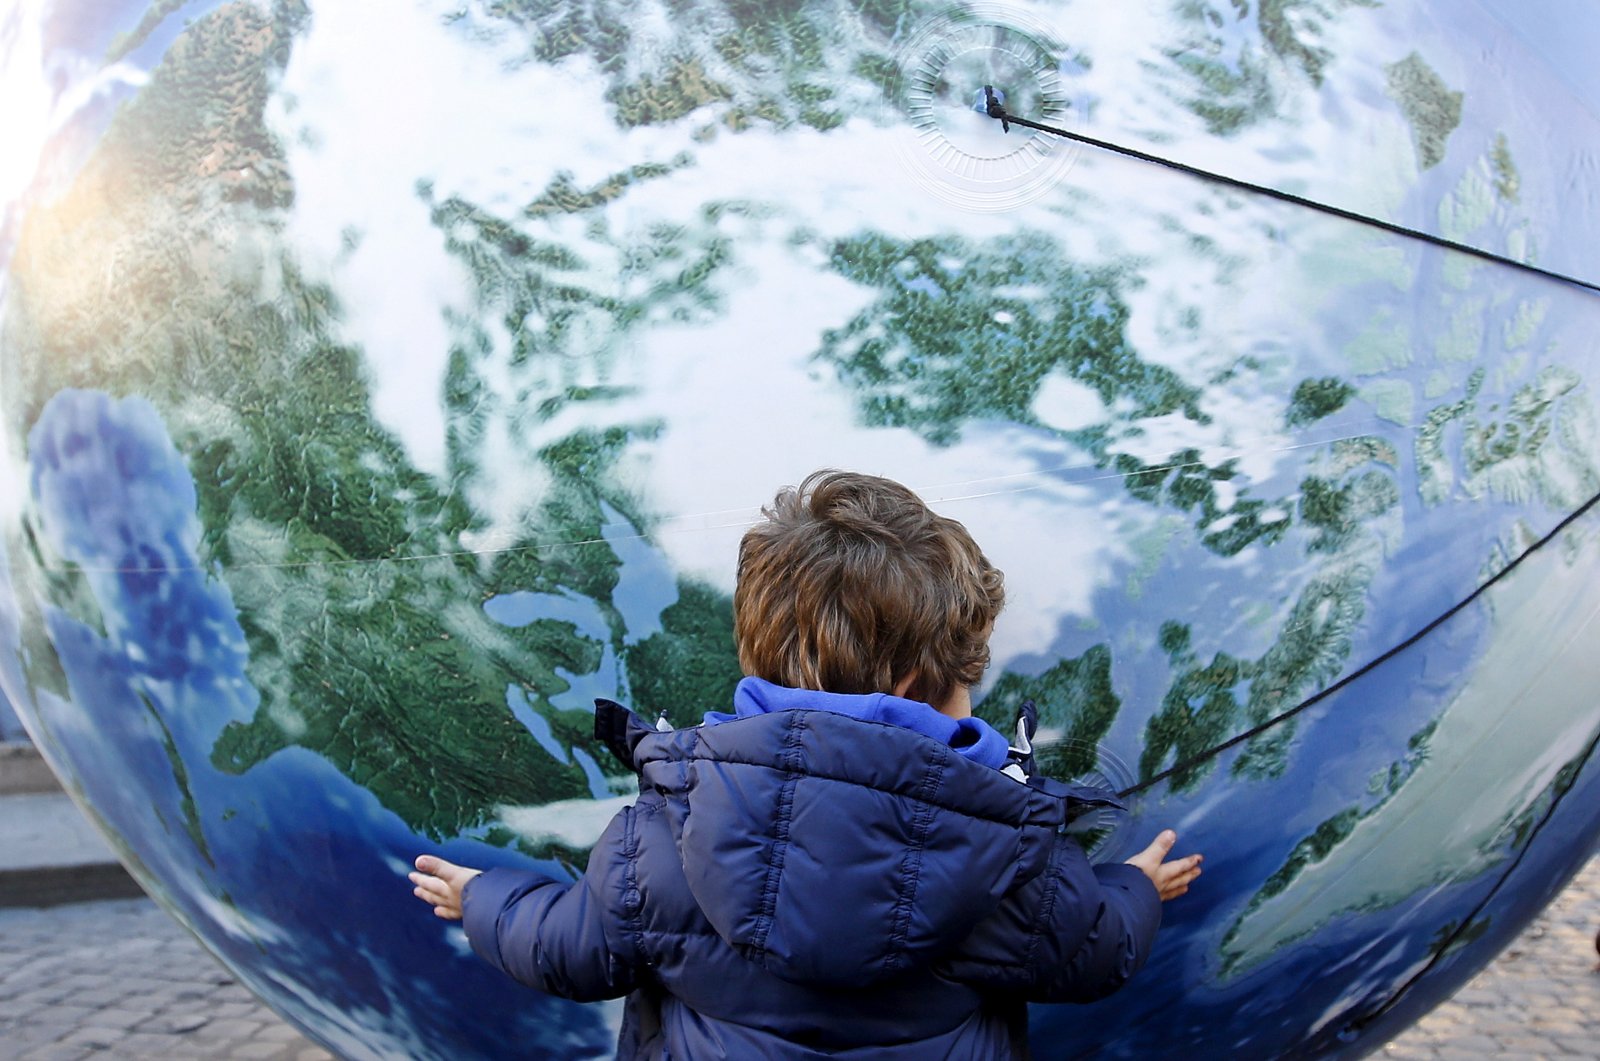  A child embraces a globe shaped balloon during a rally held ahead of the start of the 2015 Paris World Climate Change Conference, known as the COP21 summit, in Rome, Italy , Nov. 29, 2015. (Reuters Photo) 